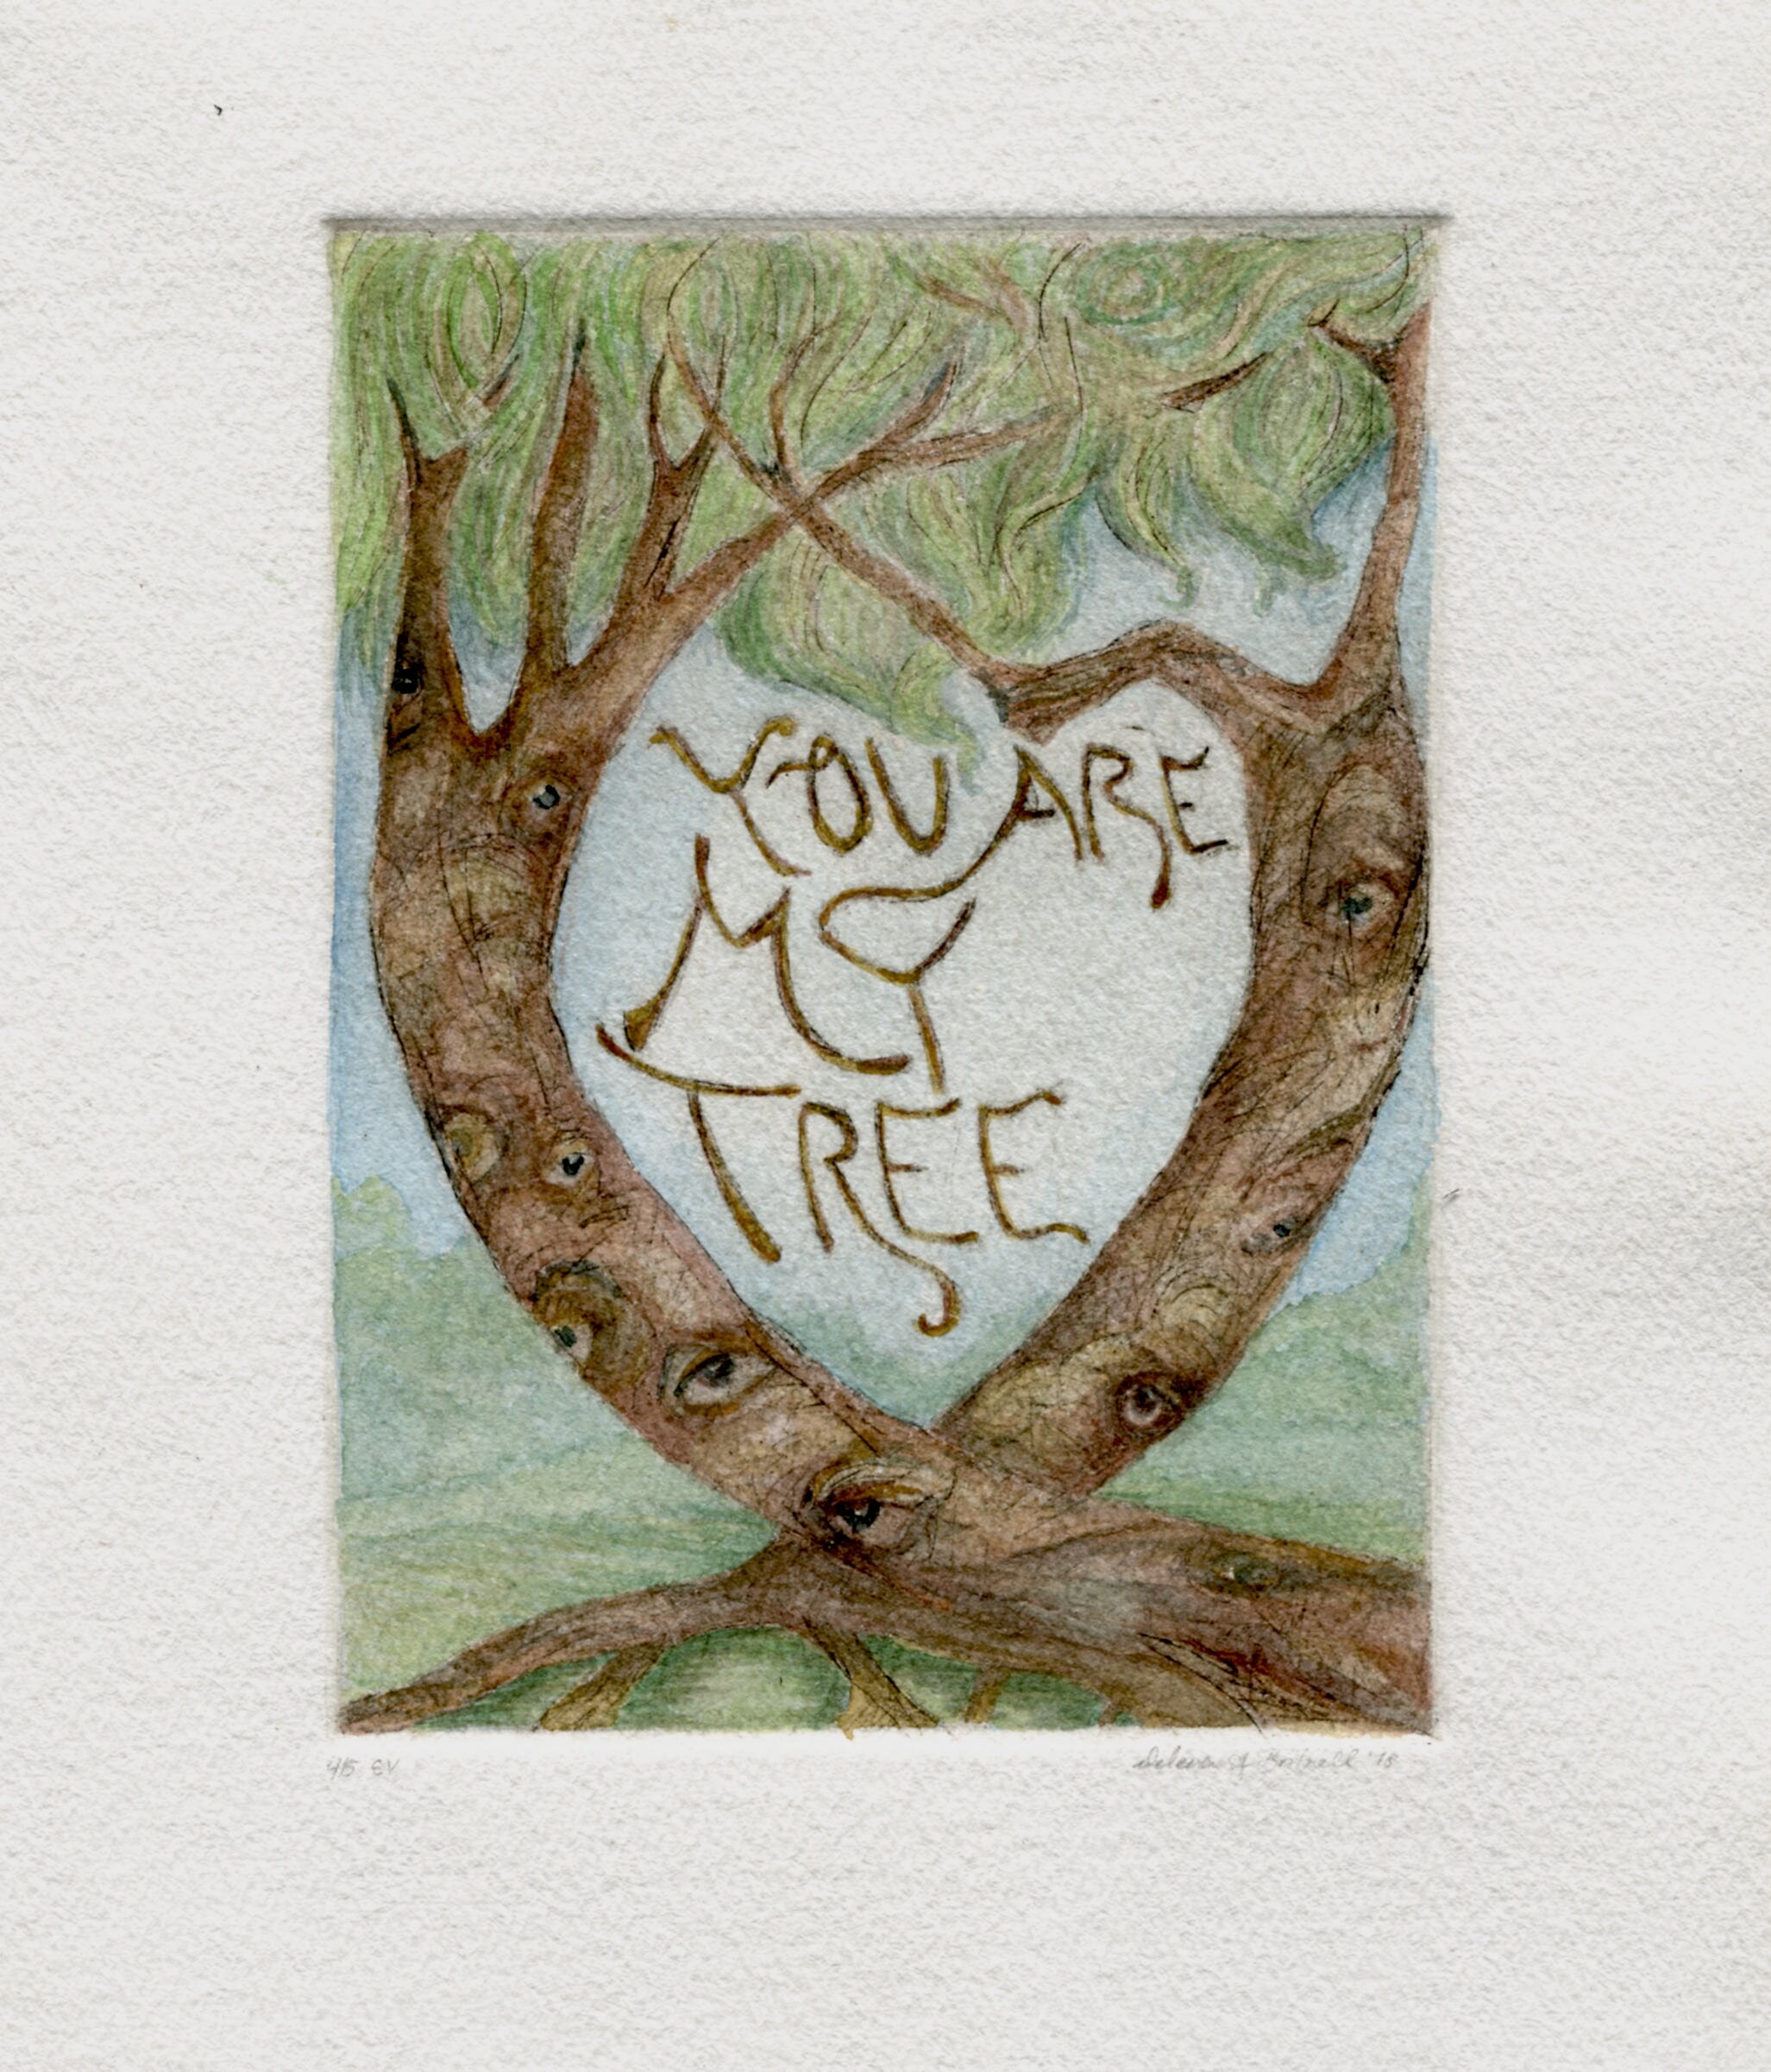 You are my tree 3/5 varied edition